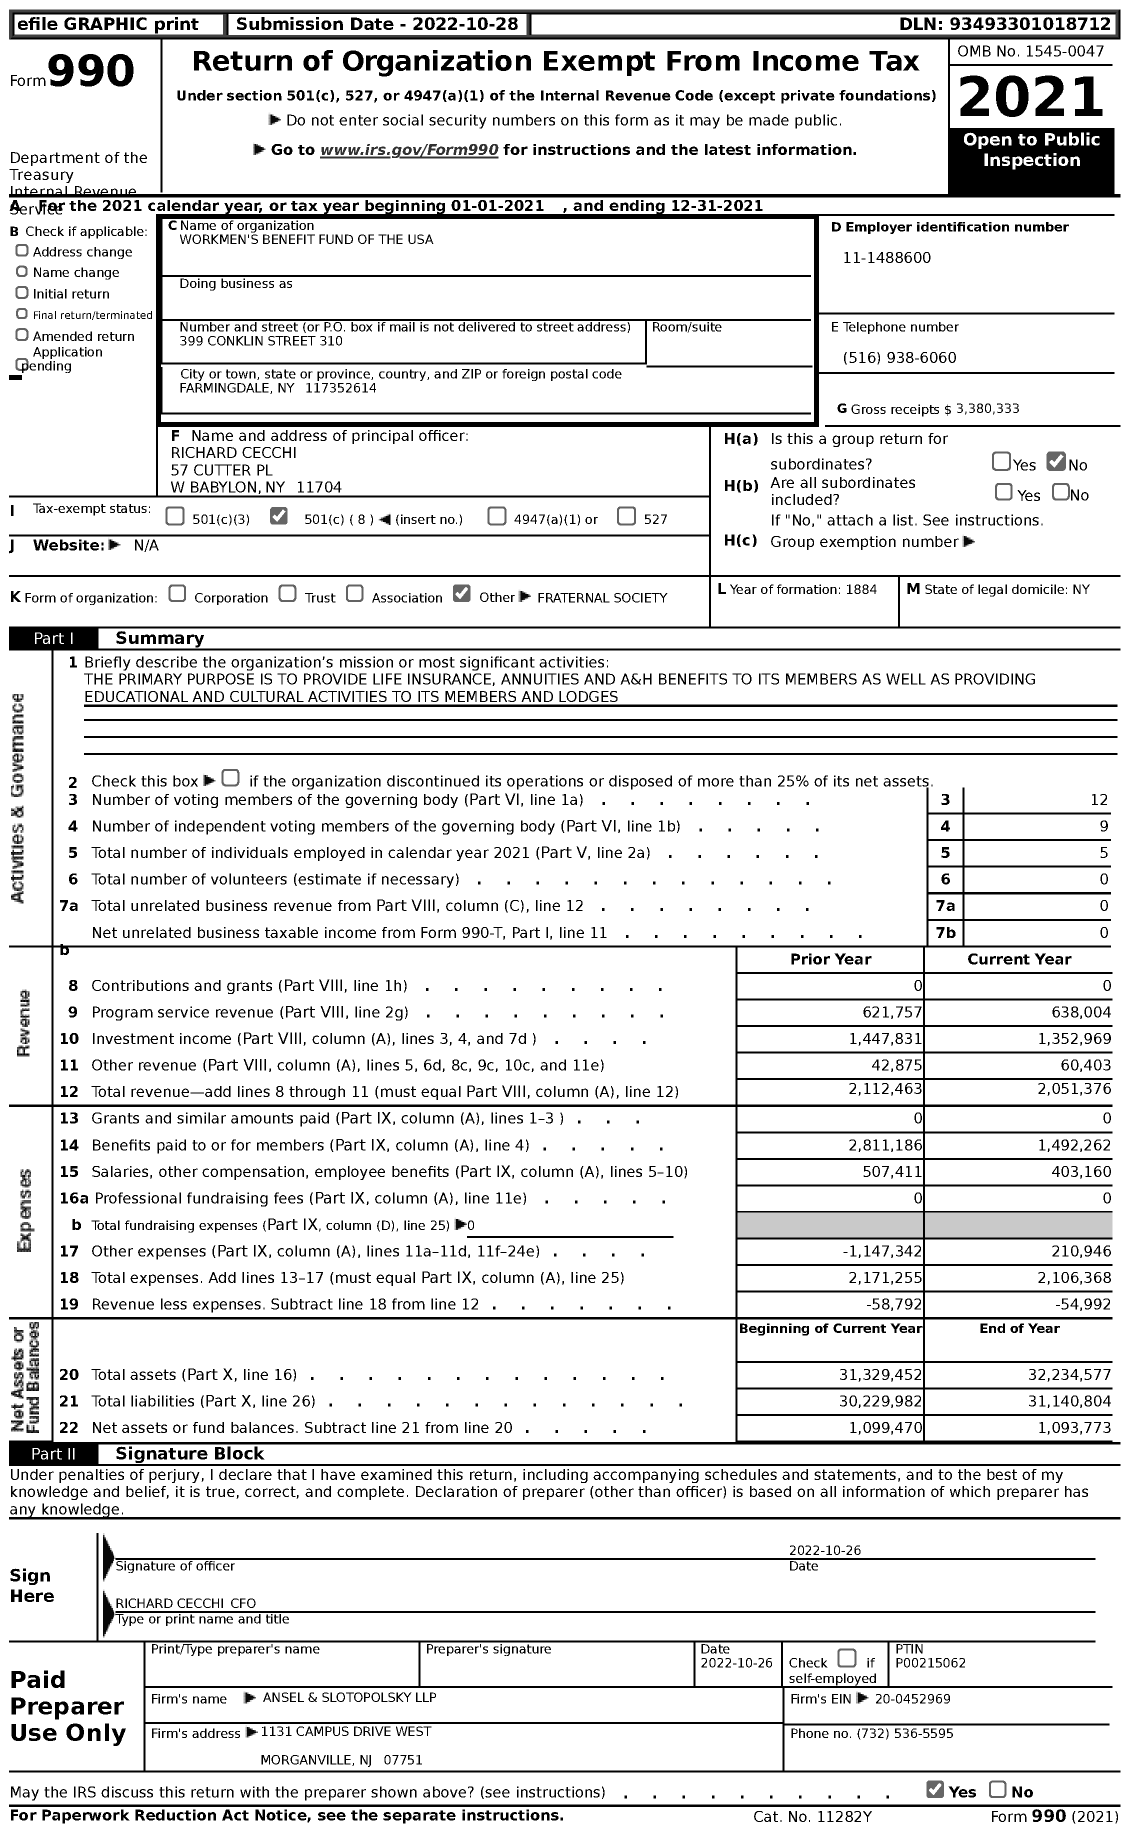 Image of first page of 2021 Form 990 for Workmen's Benefit Fund of the USA (WBF)